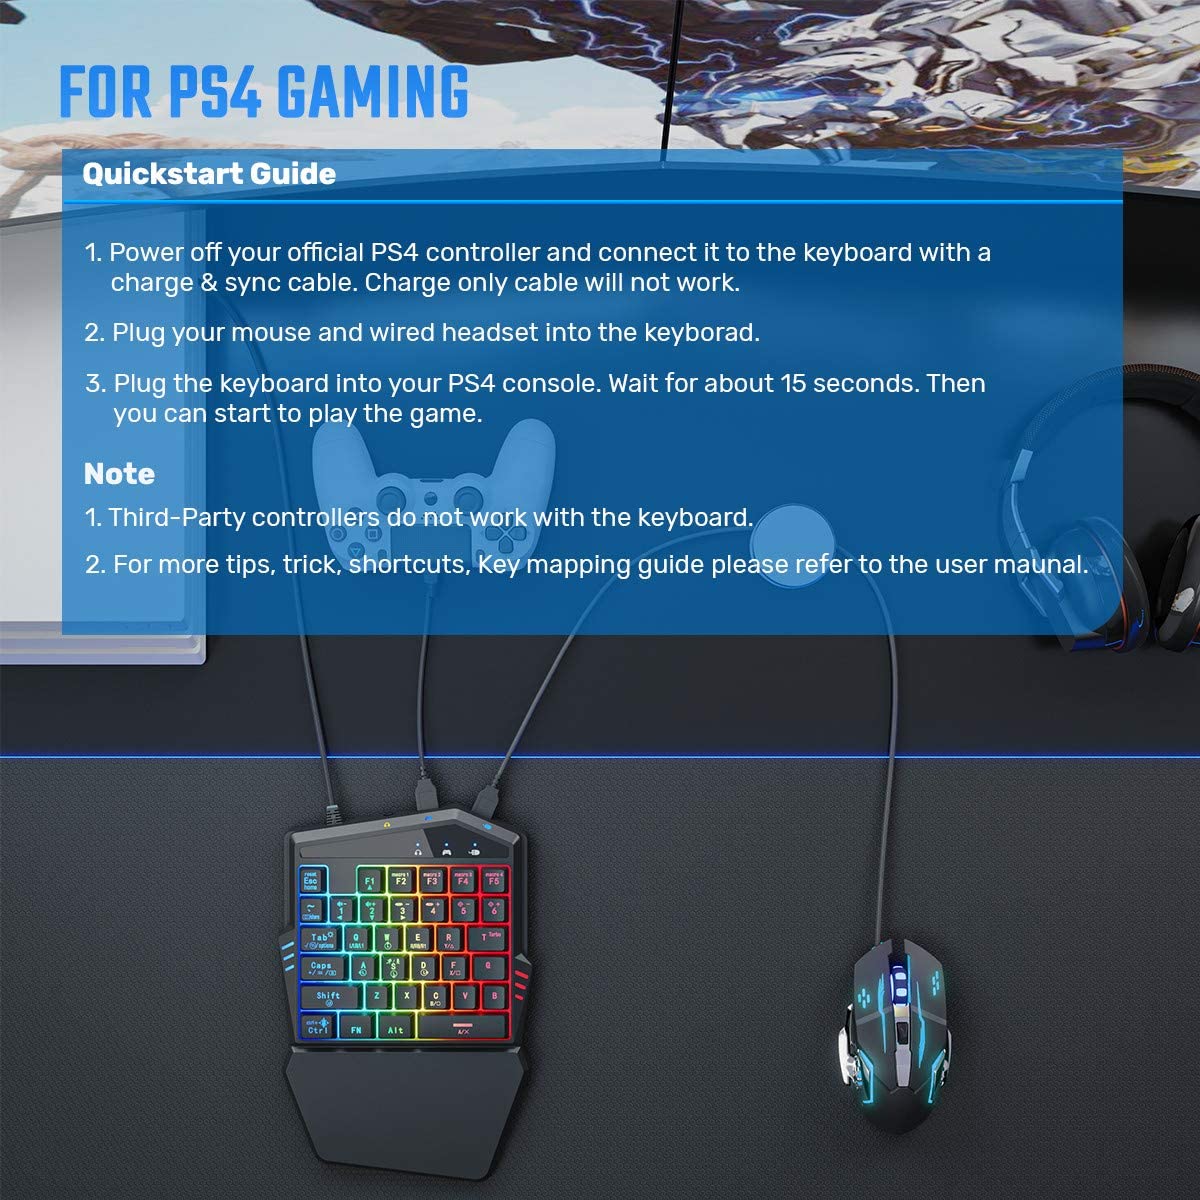 iFYOO Gaming Keyboard and Mouse Combo (Converter Build in) for PS4, PS3, Xbox One, Nintendo Switch, Xbox 360 Call of Duty/PUBG